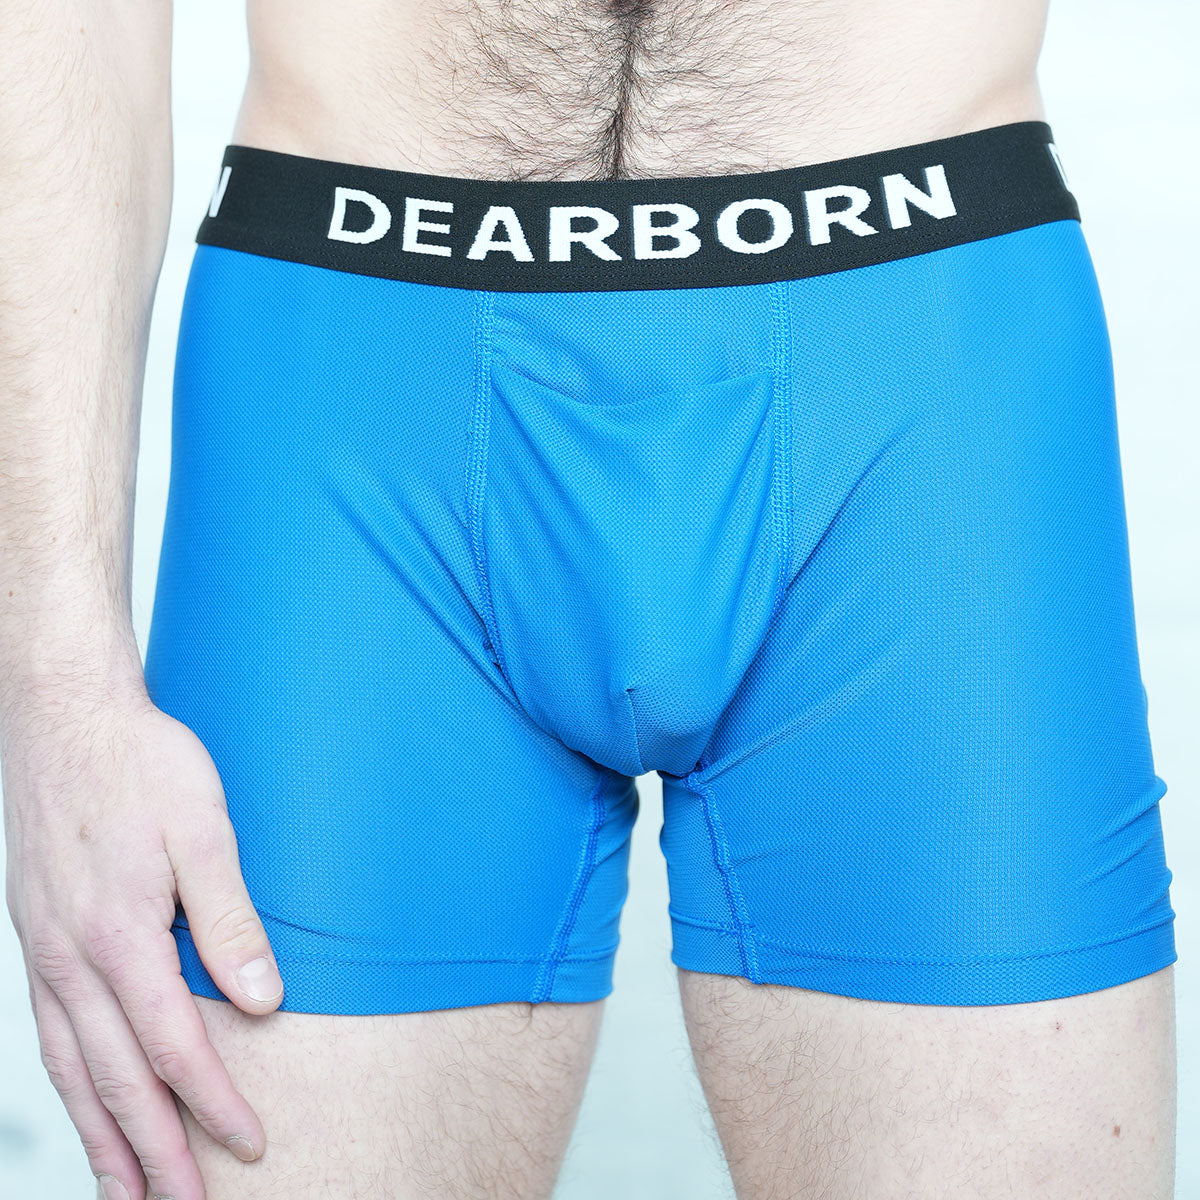 Dave on X: #dfabwordoftheday: junderwear. jeans shorts so short, they  might as well be underwear. Boxers, briefs or junderwear?   / X